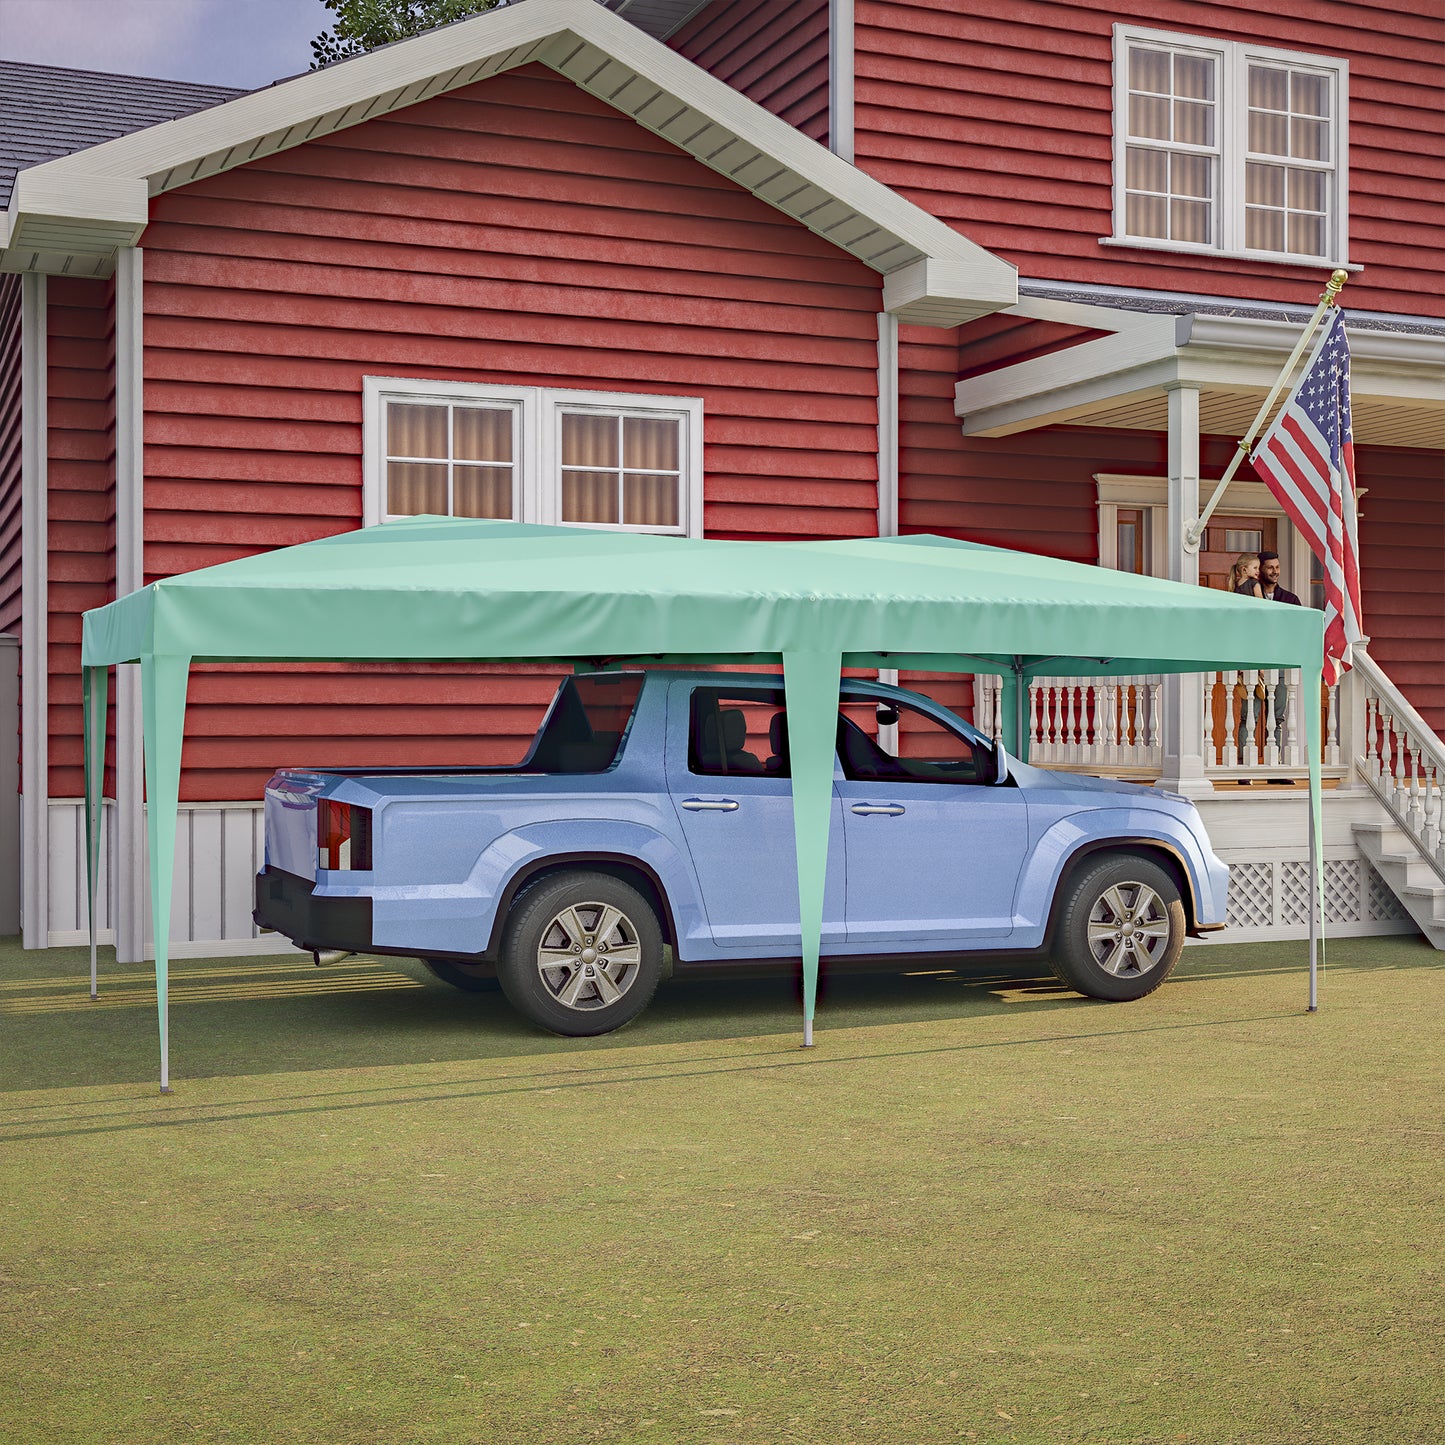 10'x20' Pop Up Canopy Outdoor Portable Party Folding Tent Green